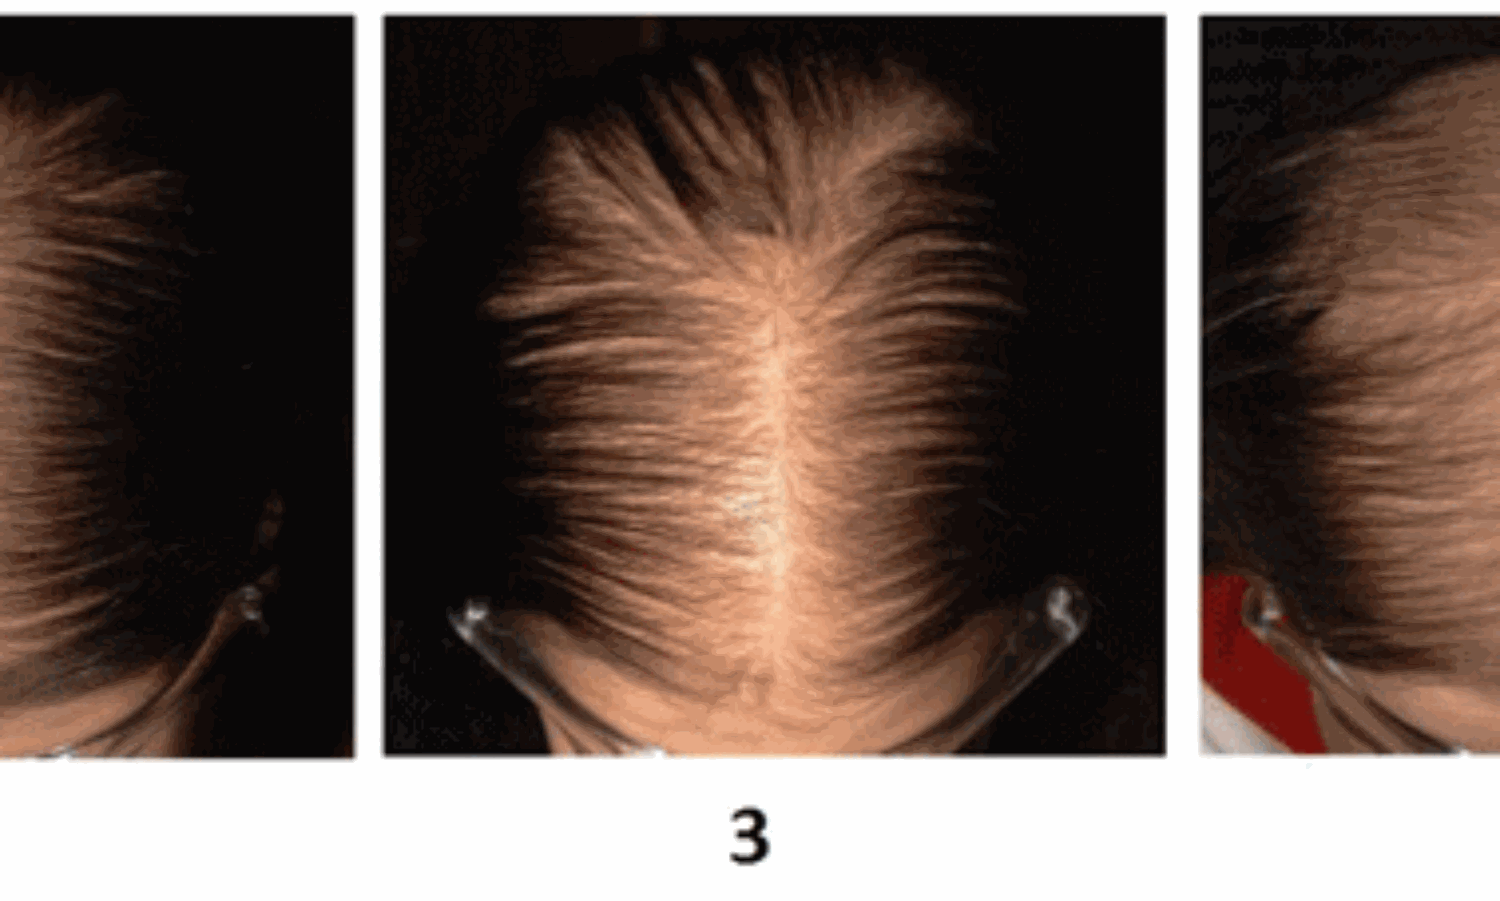 Children With Hair Loss: Causes And Effective Home Remedies